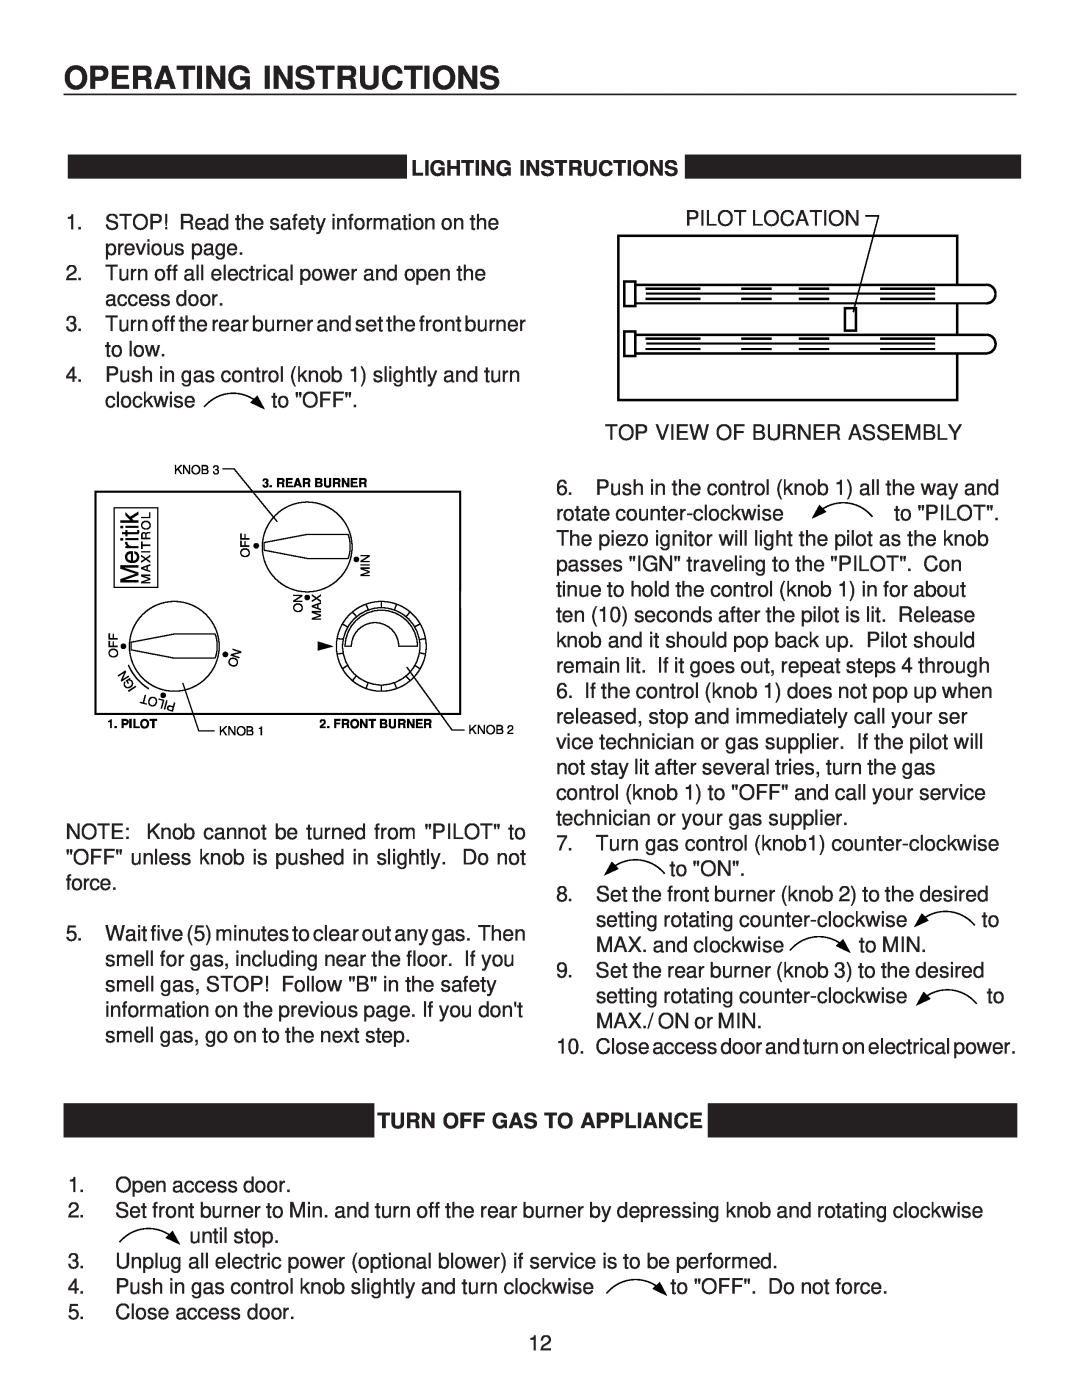 United States Stove G9740L, C9740N, A9740N, G9740N Operating Instructions, Lighting Instructions, Turn Off Gas To Appliance 